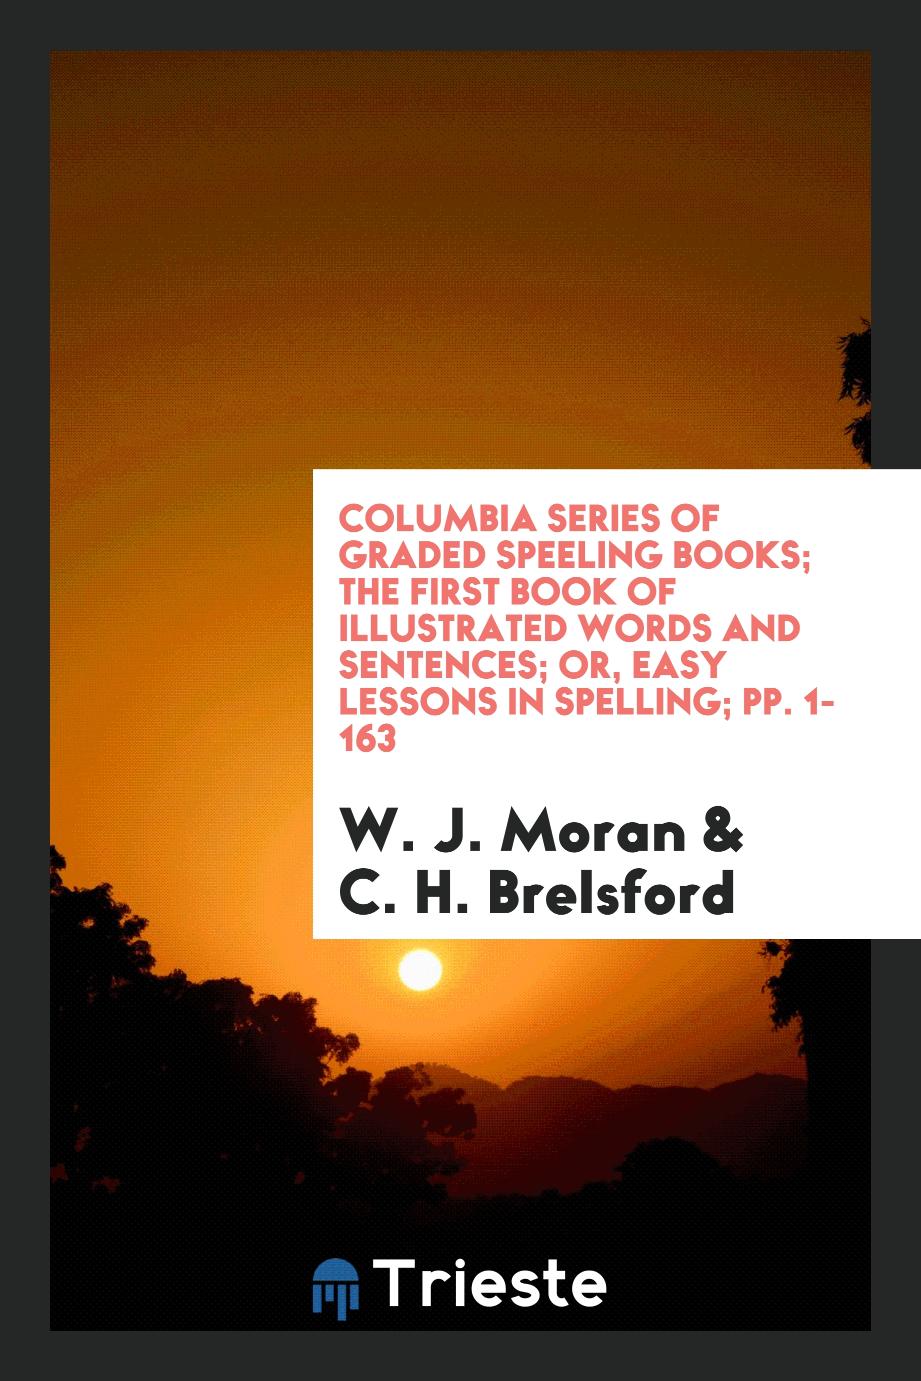 Columbia Series of Graded Speeling Books; The First Book of Illustrated Words and Sentences; Or, Easy Lessons in Spelling; pp. 1-163